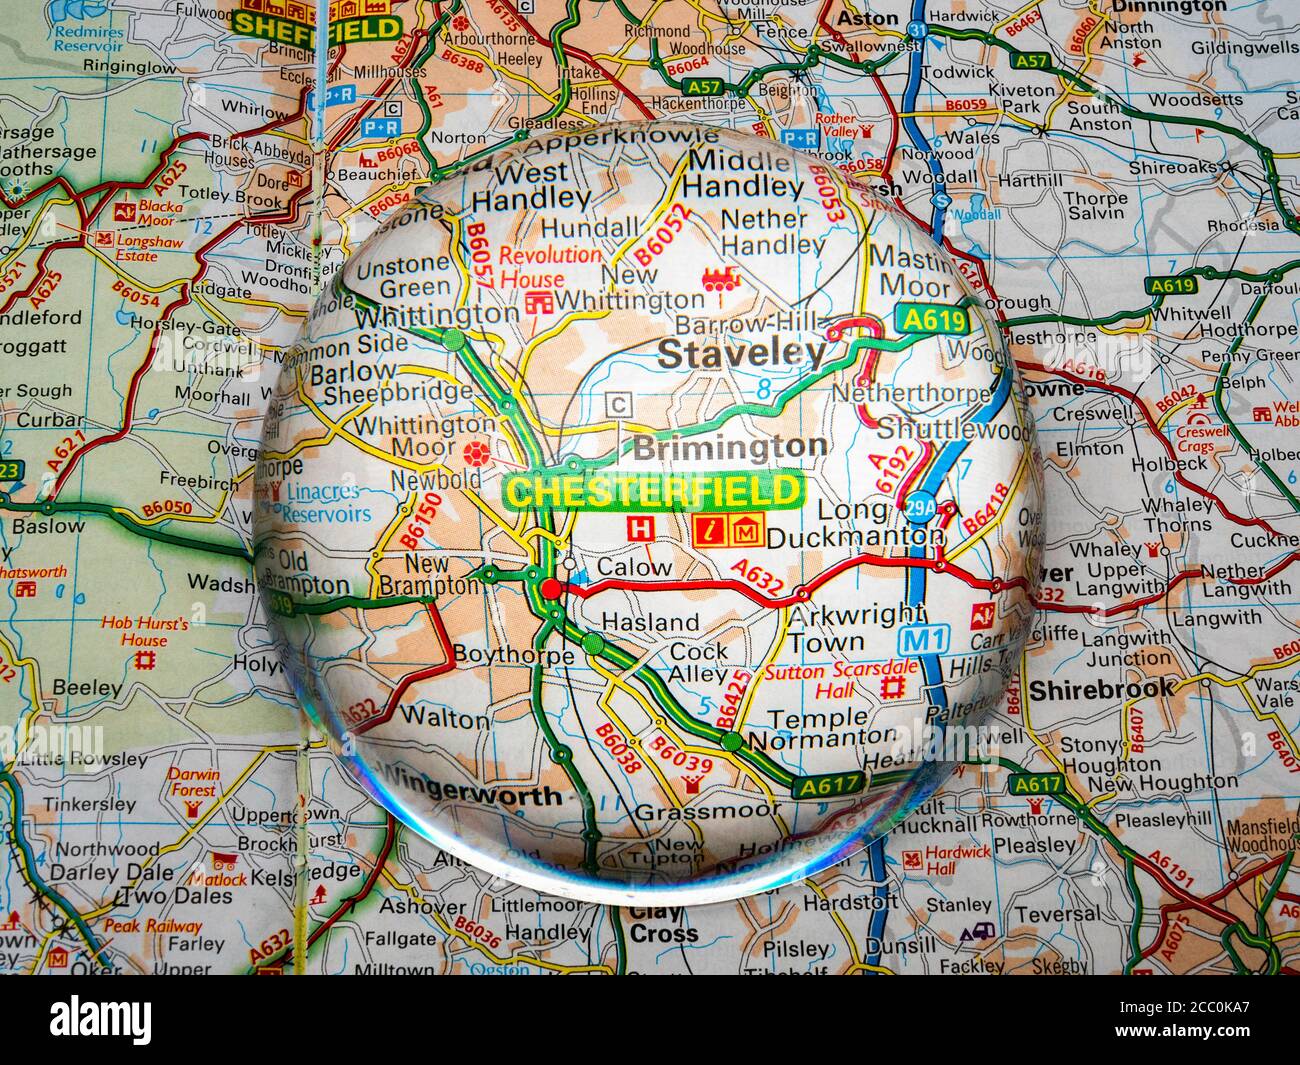 Closeup of a dome shaped magnifying glass over a page of a British road atlas map, with the Chesterfield area of England enlarged for a closer view. Stock Photo